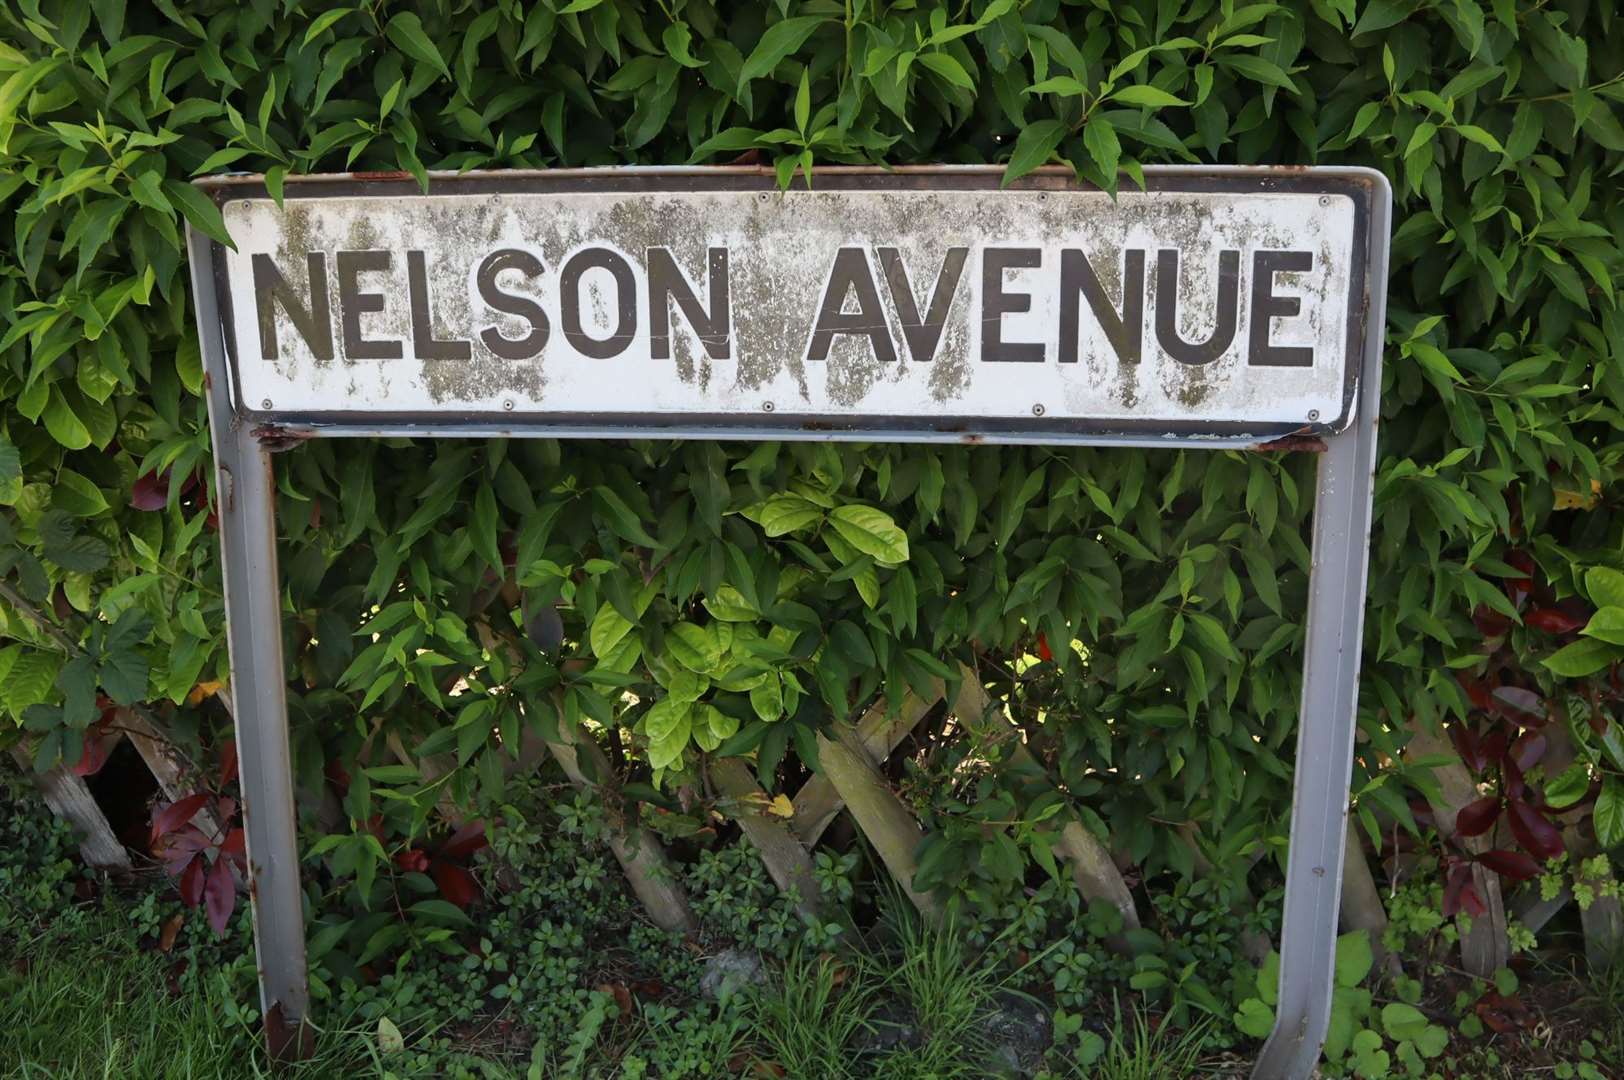 The 64-home development planned for Nelson Avenue has been refused. Picture: John Nurden